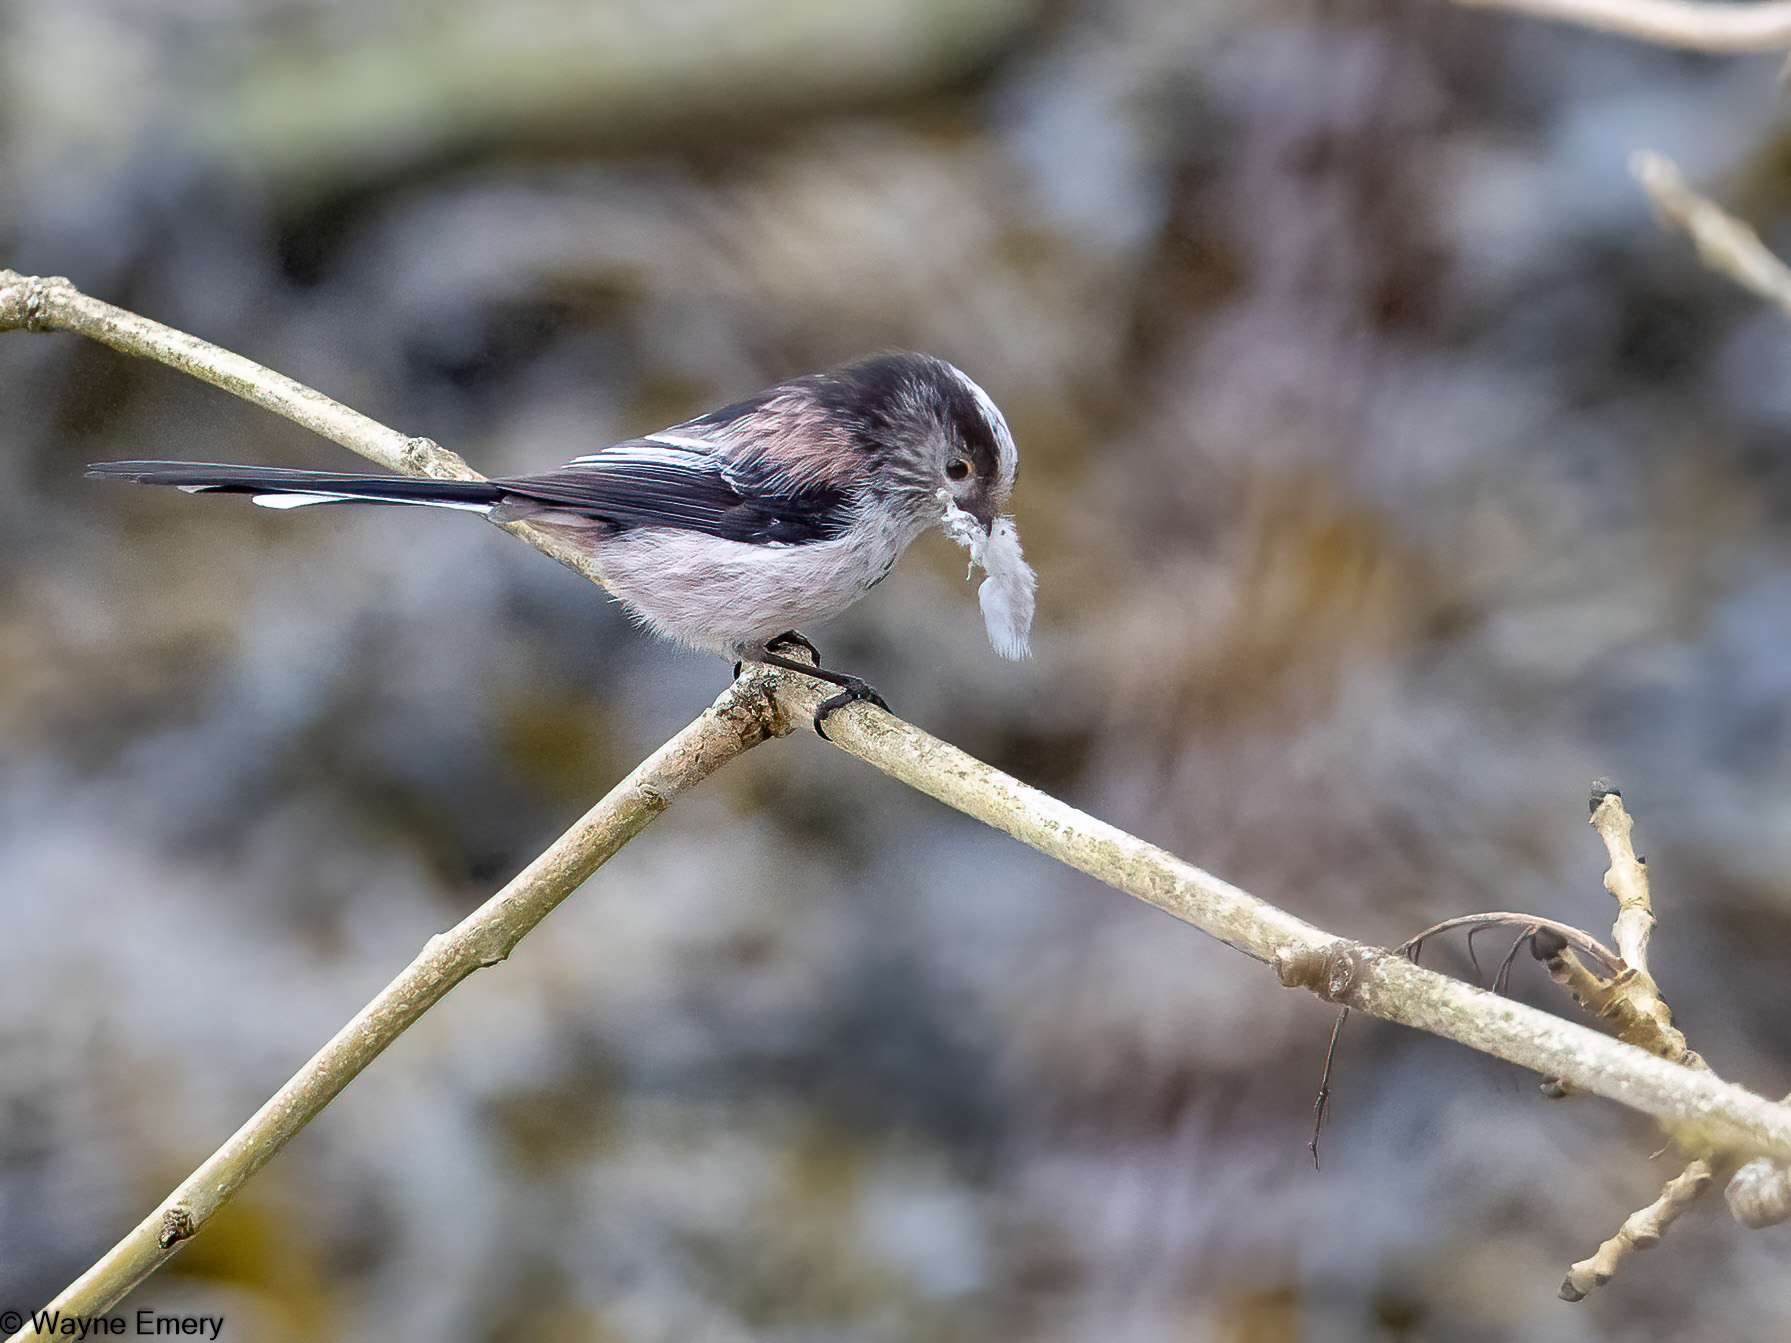 Long-tailed Tit by Wayne Emery at Saltram